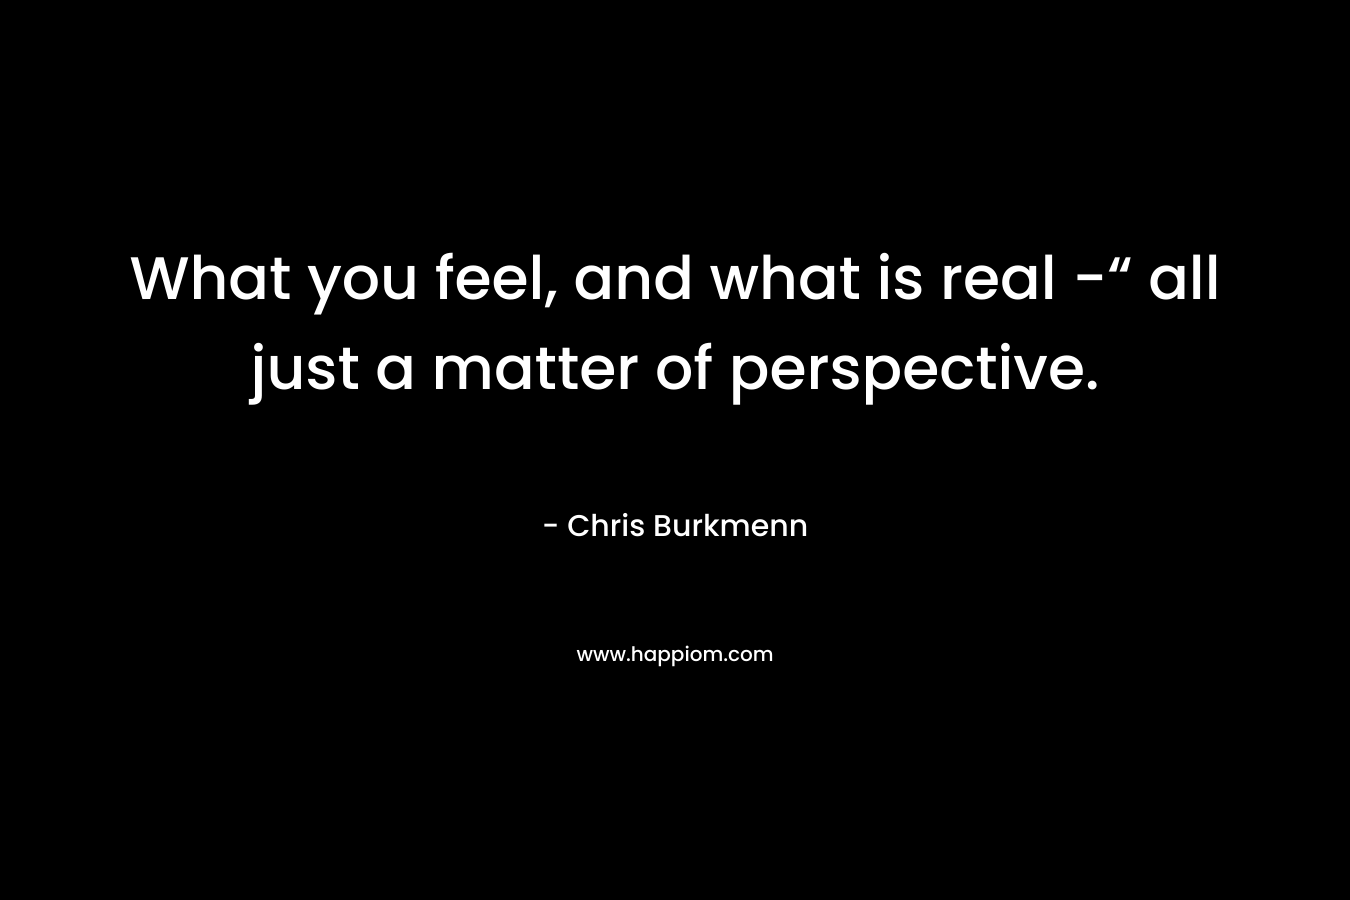 What you feel, and what is real -“ all just a matter of perspective.